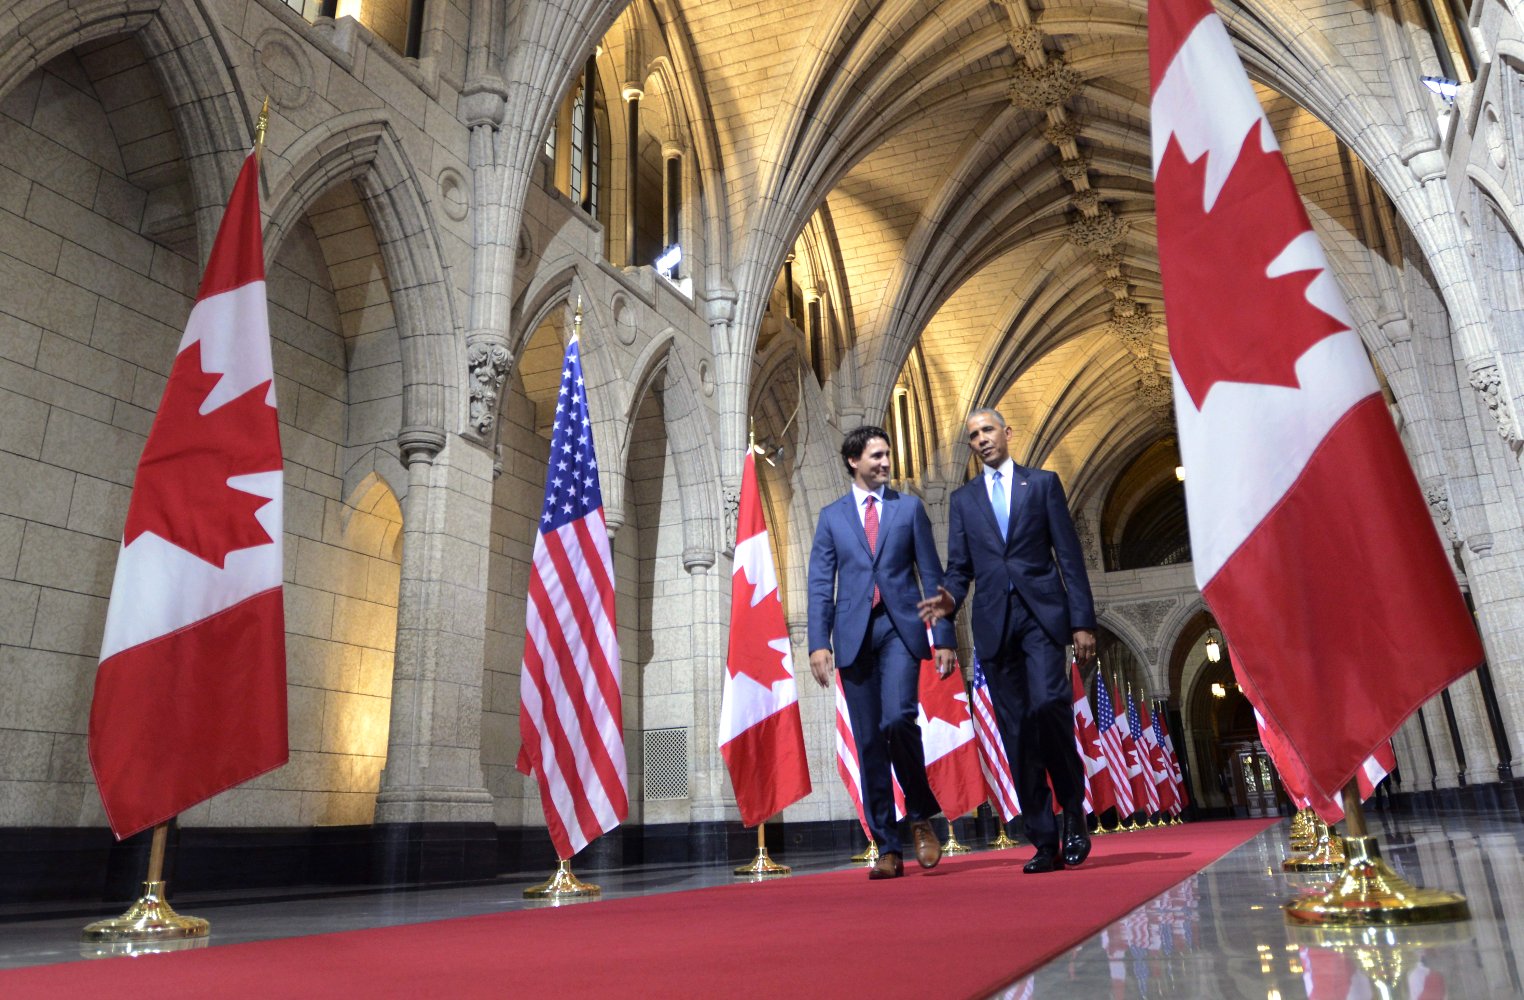 Prime Minister Justin Trudeau and U.S. President Barack Obama walk down the Hall of Honour on Parliament Hill on Wednesday, June 29, 2016 in Ottawa. Google image from https://www.macleans.ca/politics/ottawa/president-obamas-speech-to-house-of-commons-the-full-text/